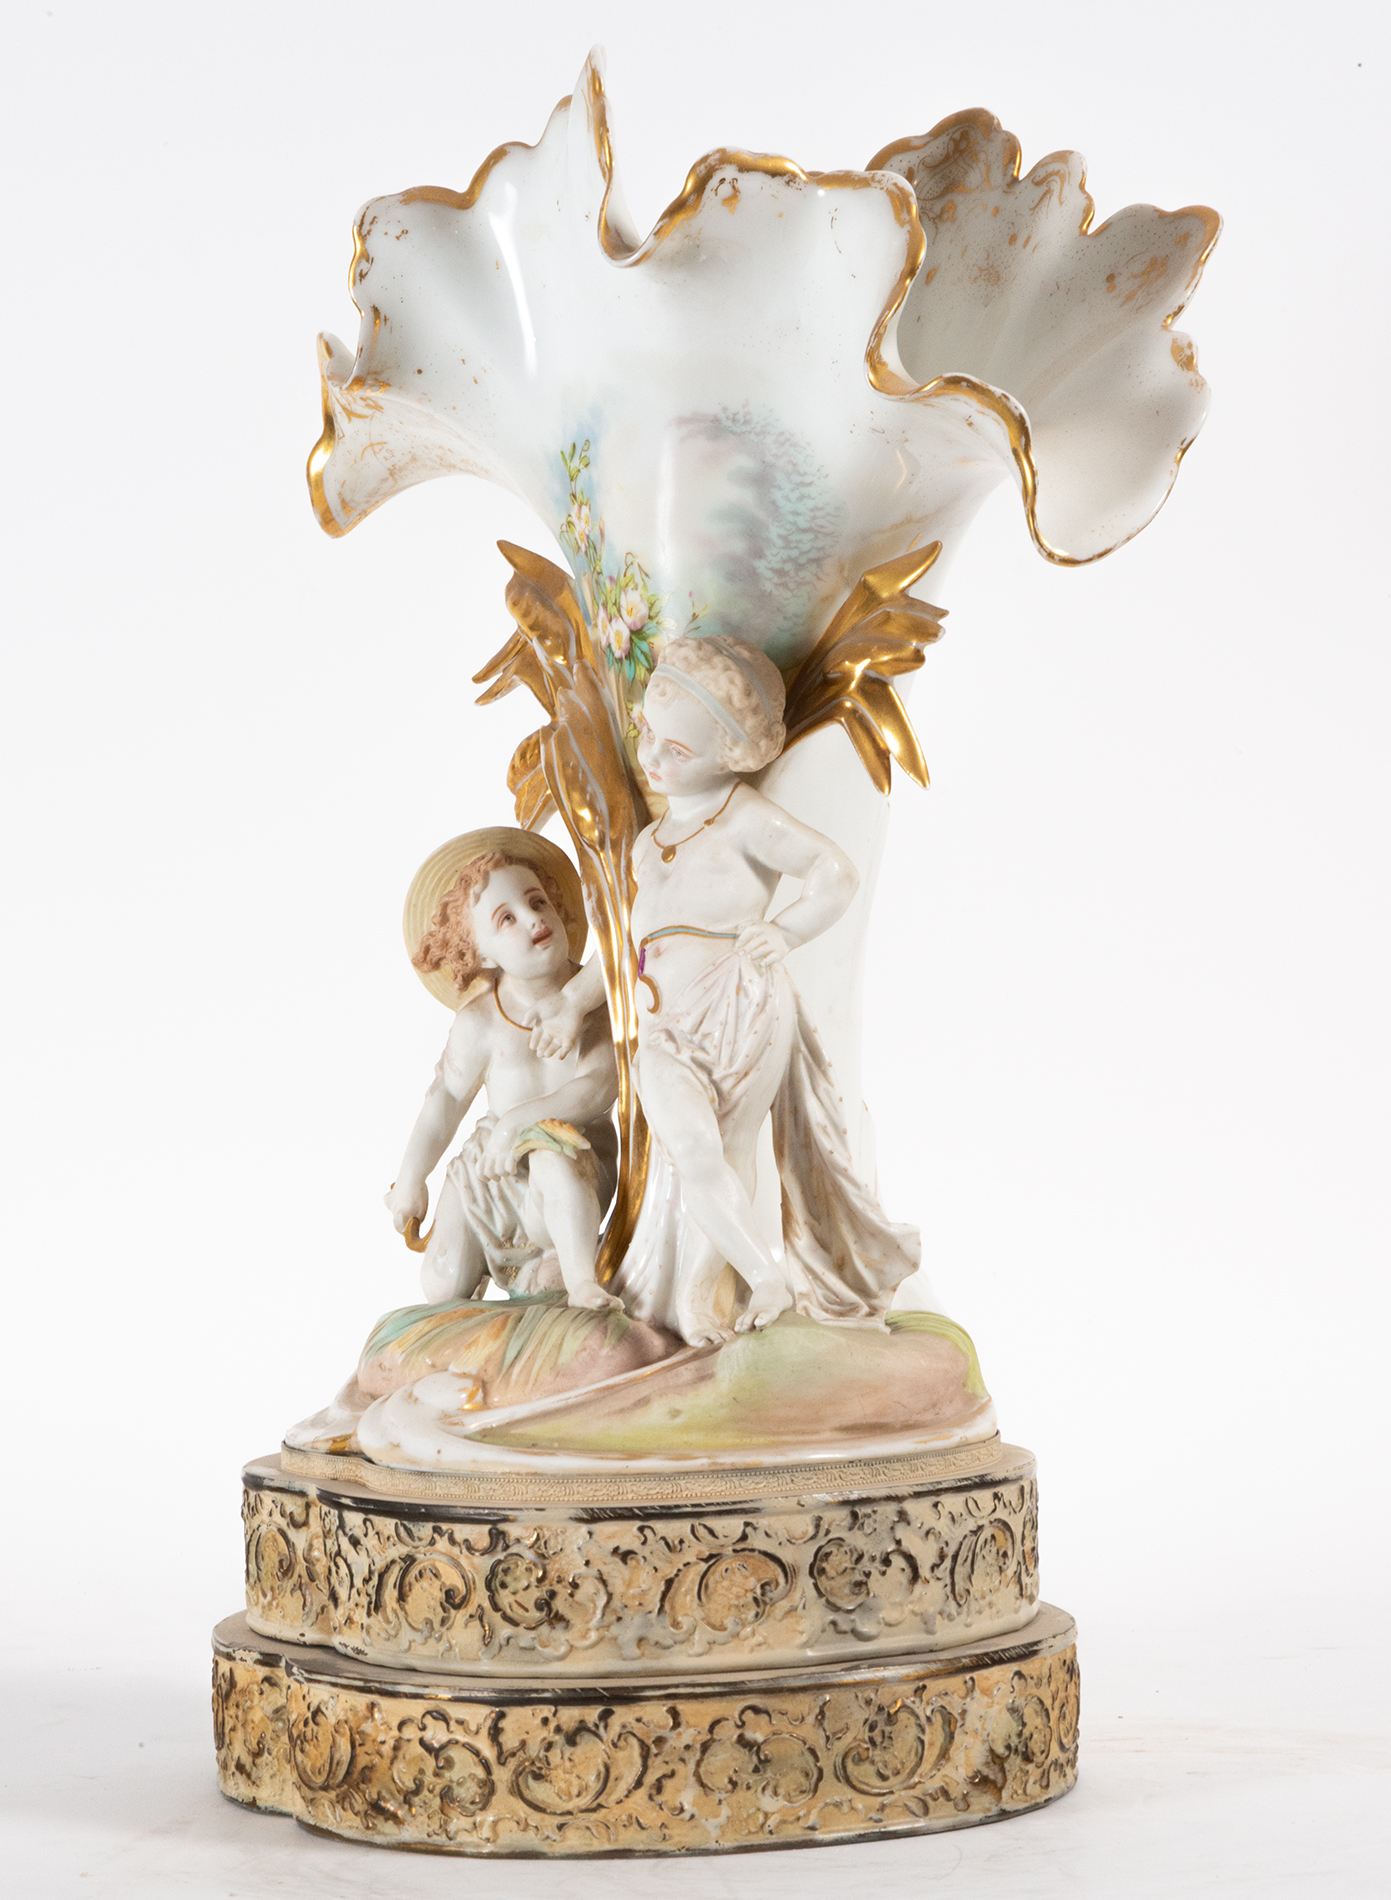 Pair of Vases with Little Shepherds in glazed biscuit porcelain, 19th century - Image 3 of 8